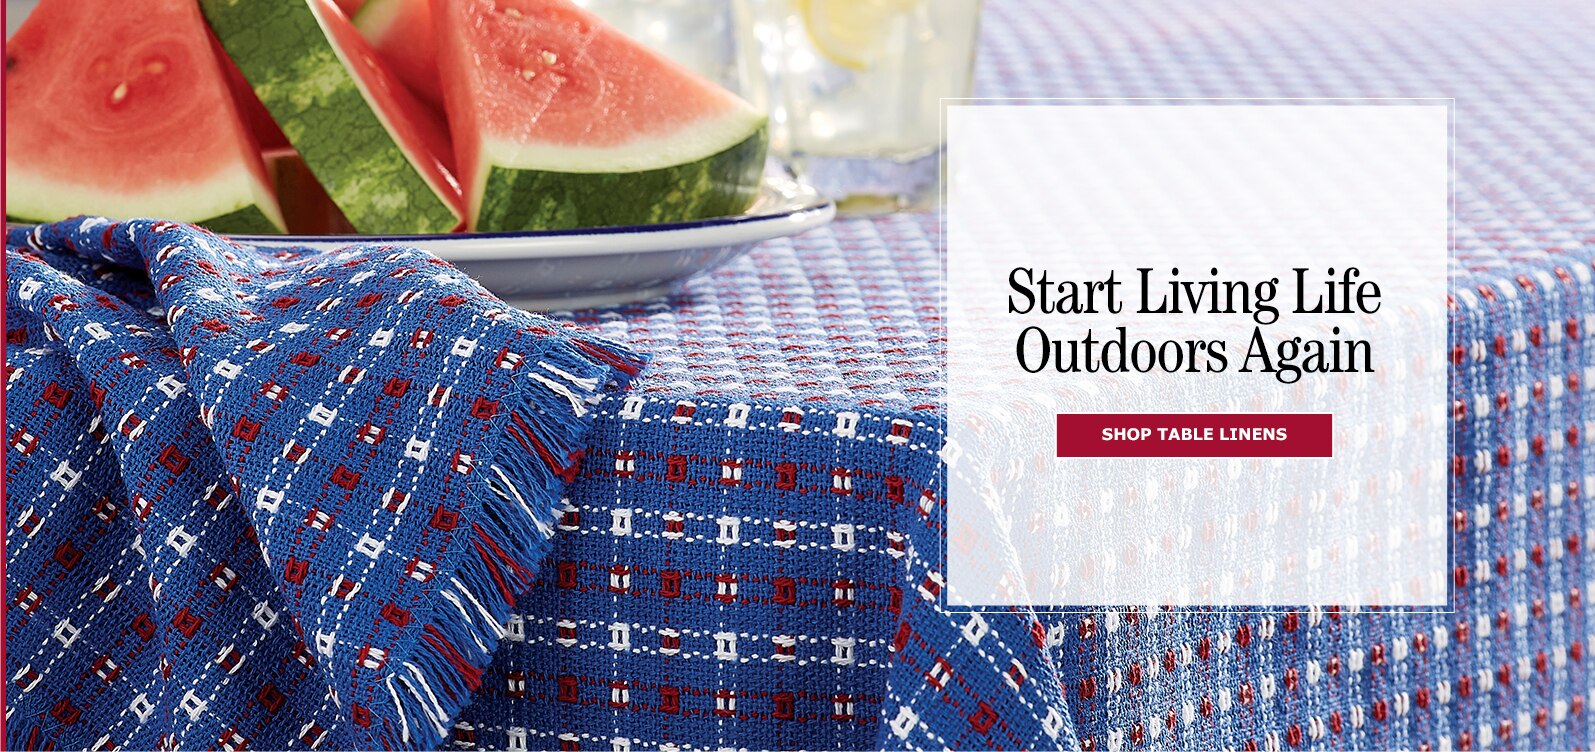 Start Living Life Outdoors Again. Shop Table Linens.